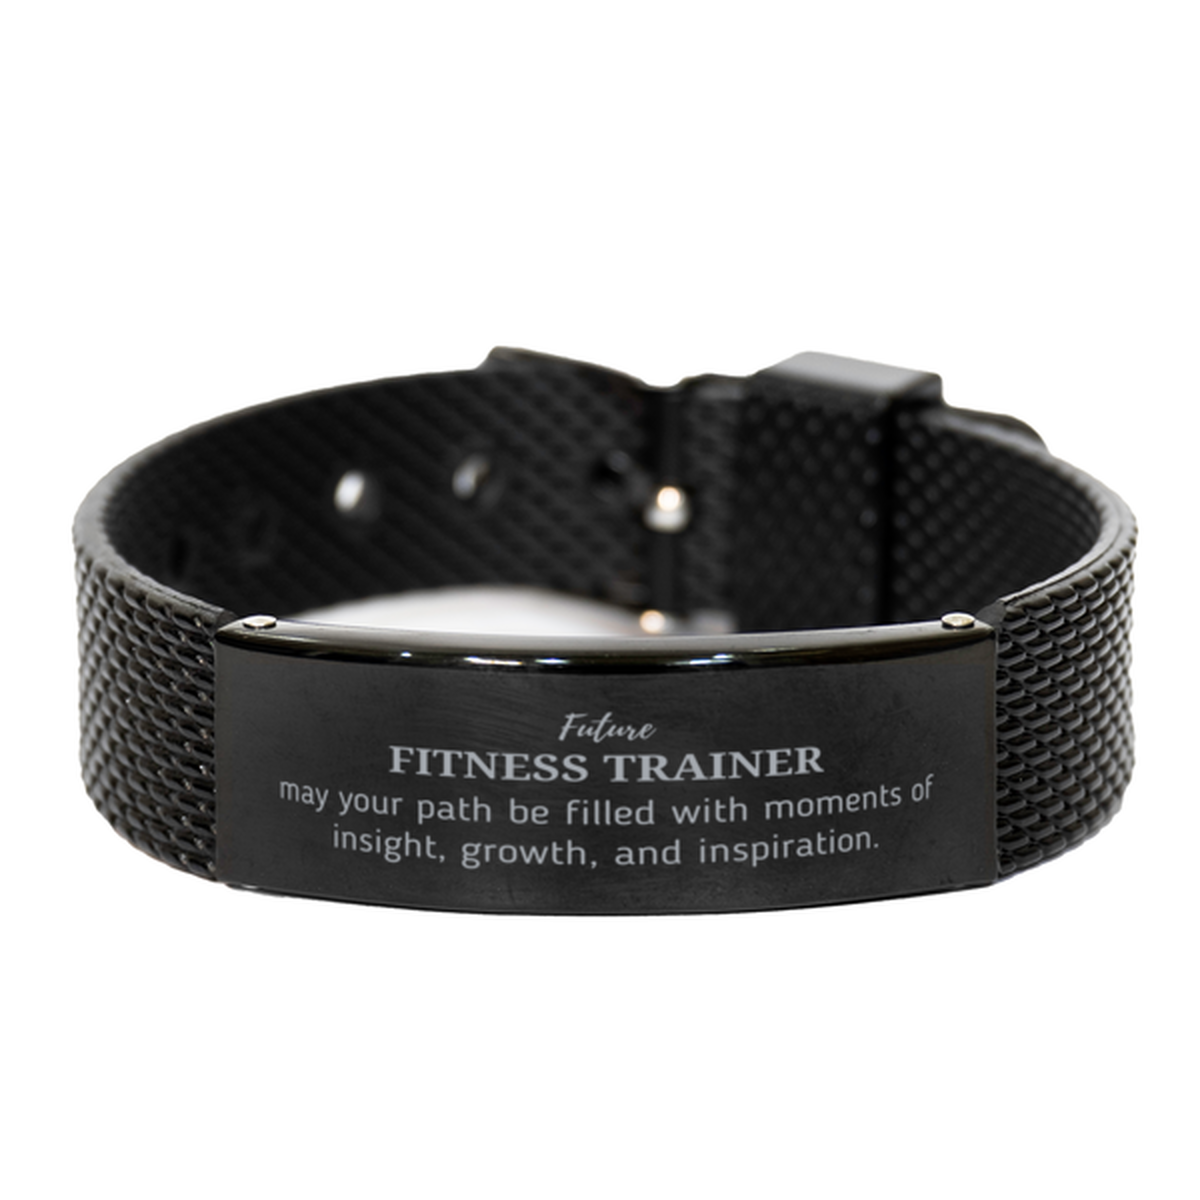 Future Fitness Trainer Gifts, May your path be filled with moments of insight, Graduation Gifts for New Fitness Trainer, Christmas Unique Black Shark Mesh Bracelet For Men, Women, Friends